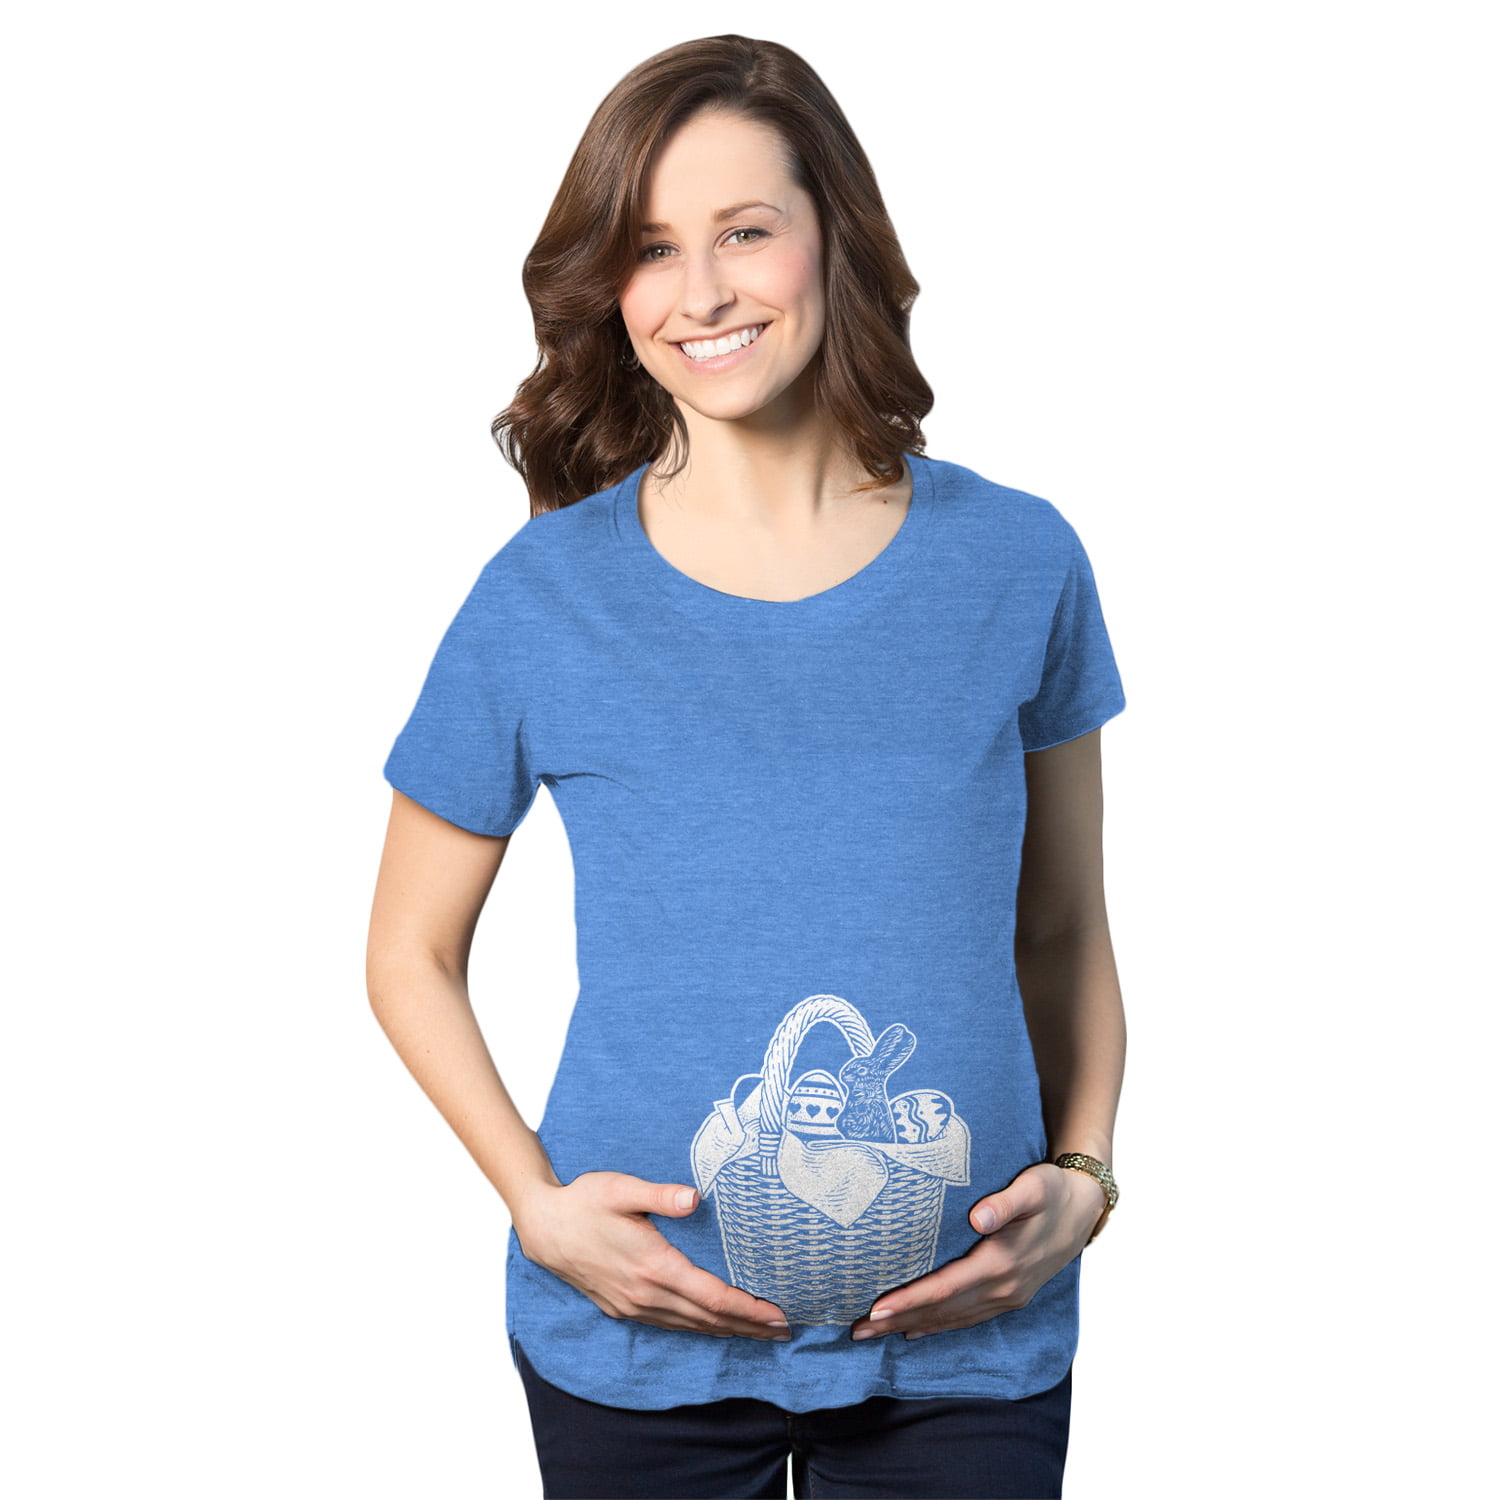 Details about   MAMA Est New Mum Baby T-Shirt Top Woman's Quirky Novelty Glitter Blue Pink Print 